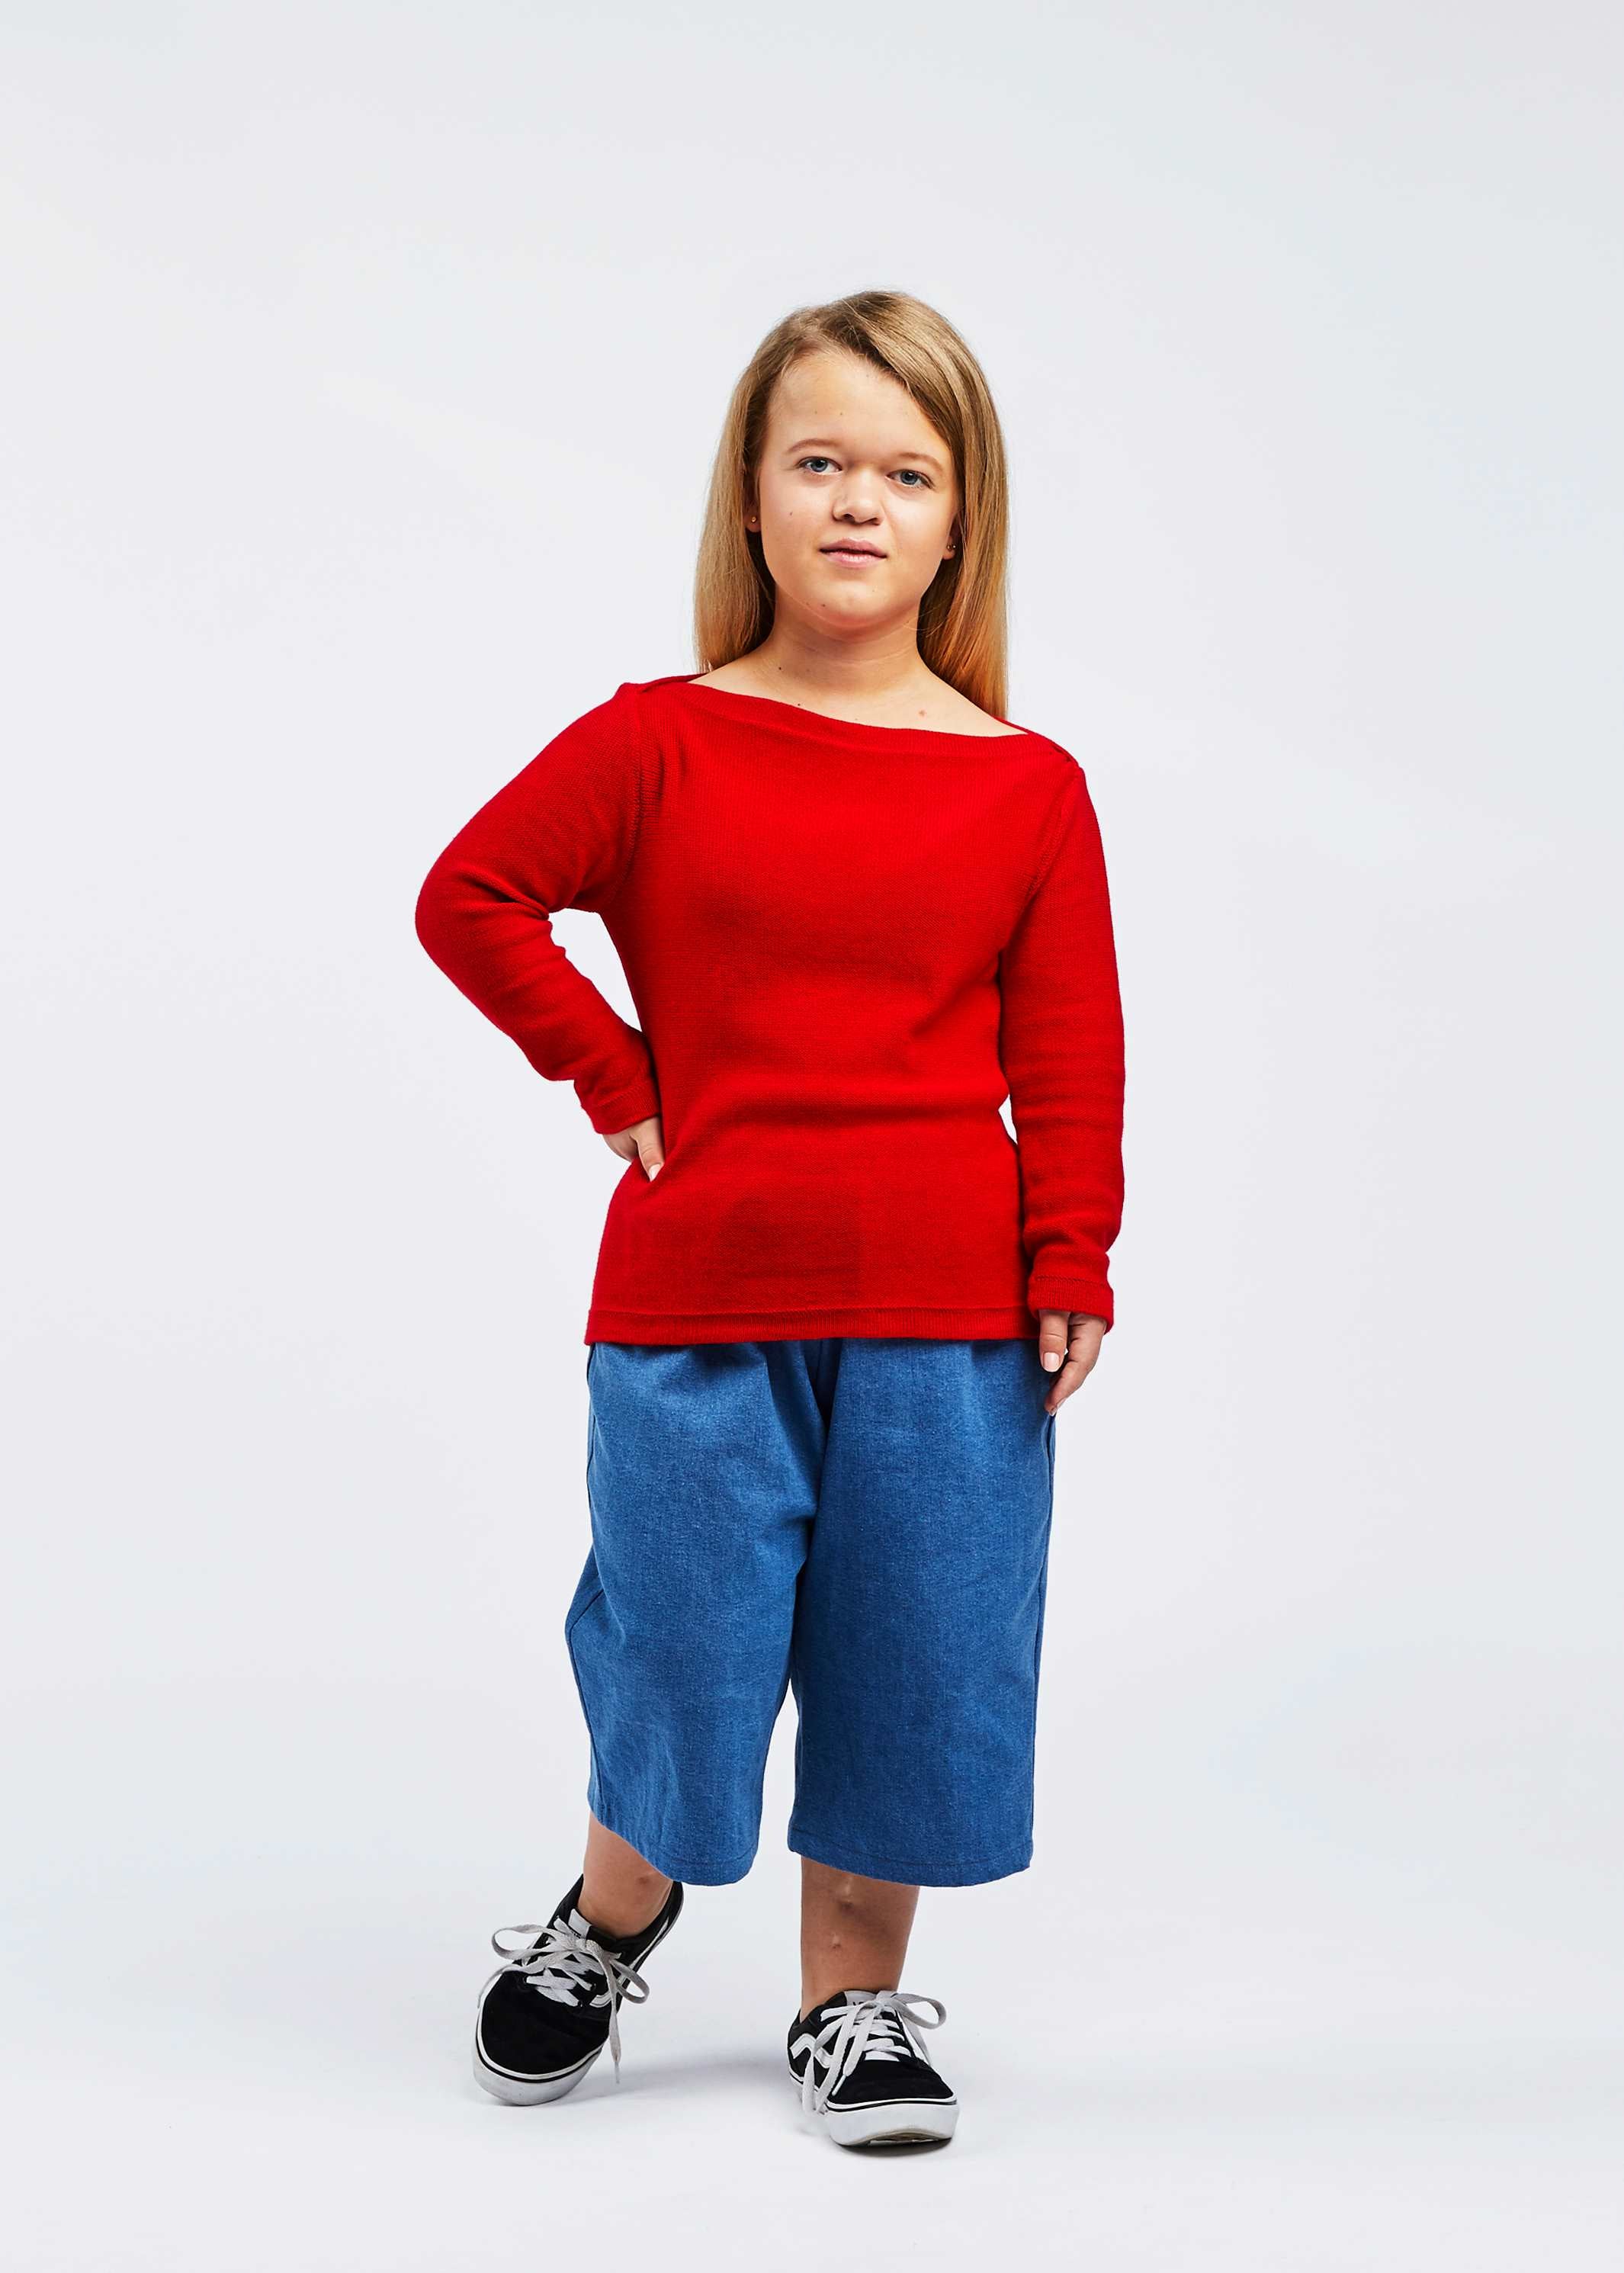 woman with dwarfism wearing red pullover and blue pants